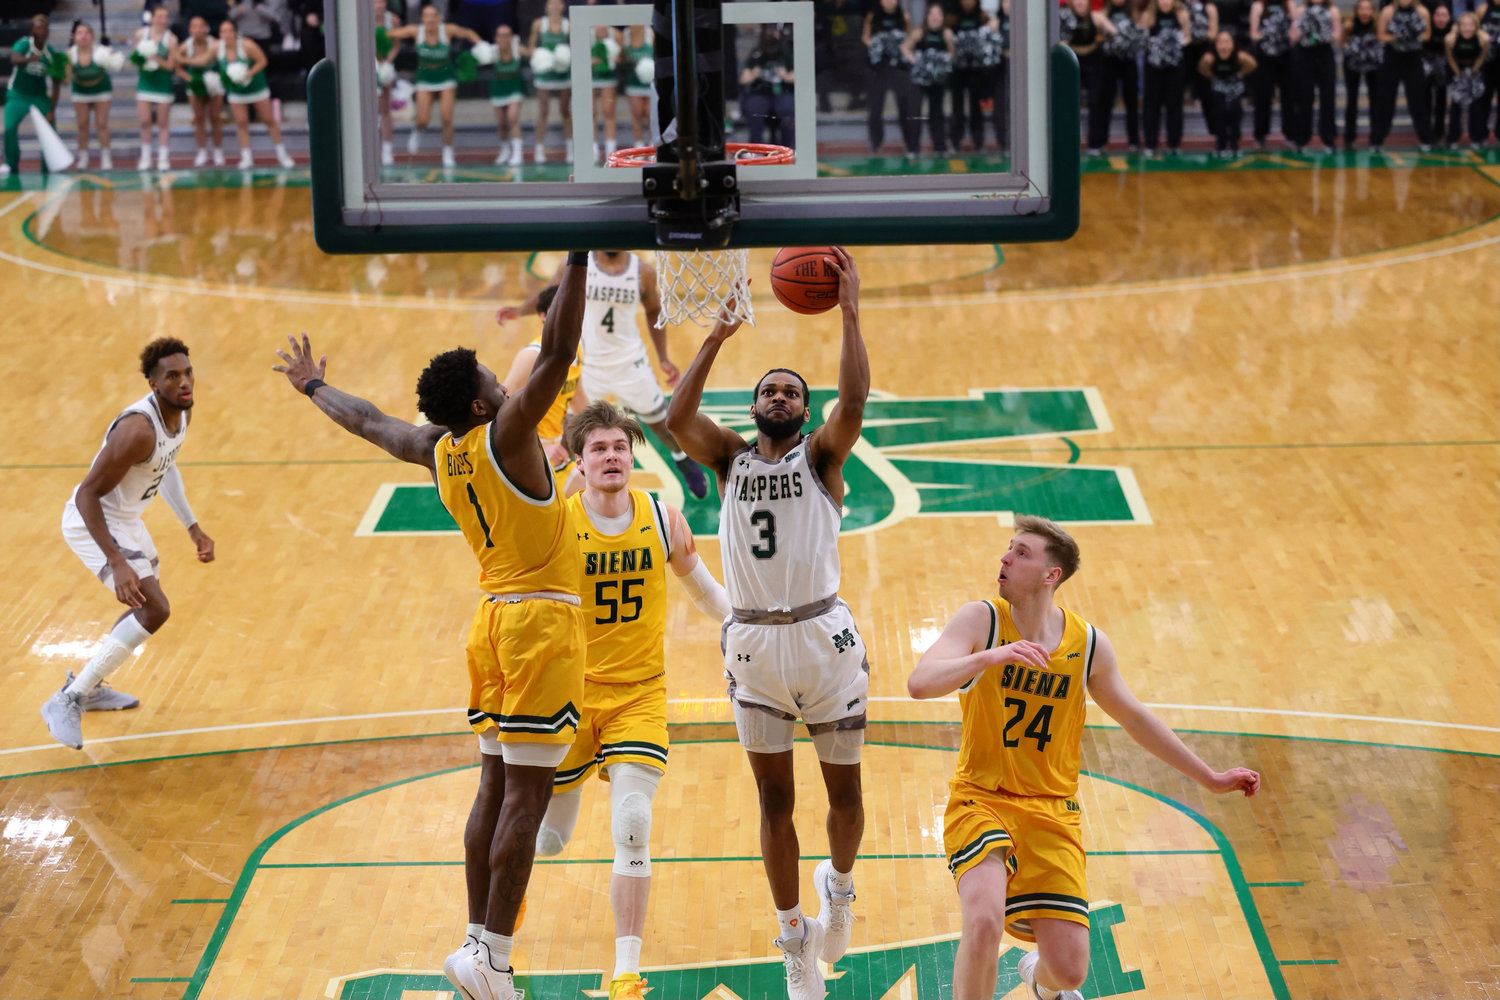 Manhattan’s Ant Nelson drives to the hoop against Siena in a game the Jaspers won 71-66. Nelson scored the game-tying basket with four seconds left, which forced overtime before Manhattan ran away with a 14-9 margin in the additional minutes. It capped off Manhattan’s eighth win of the season.